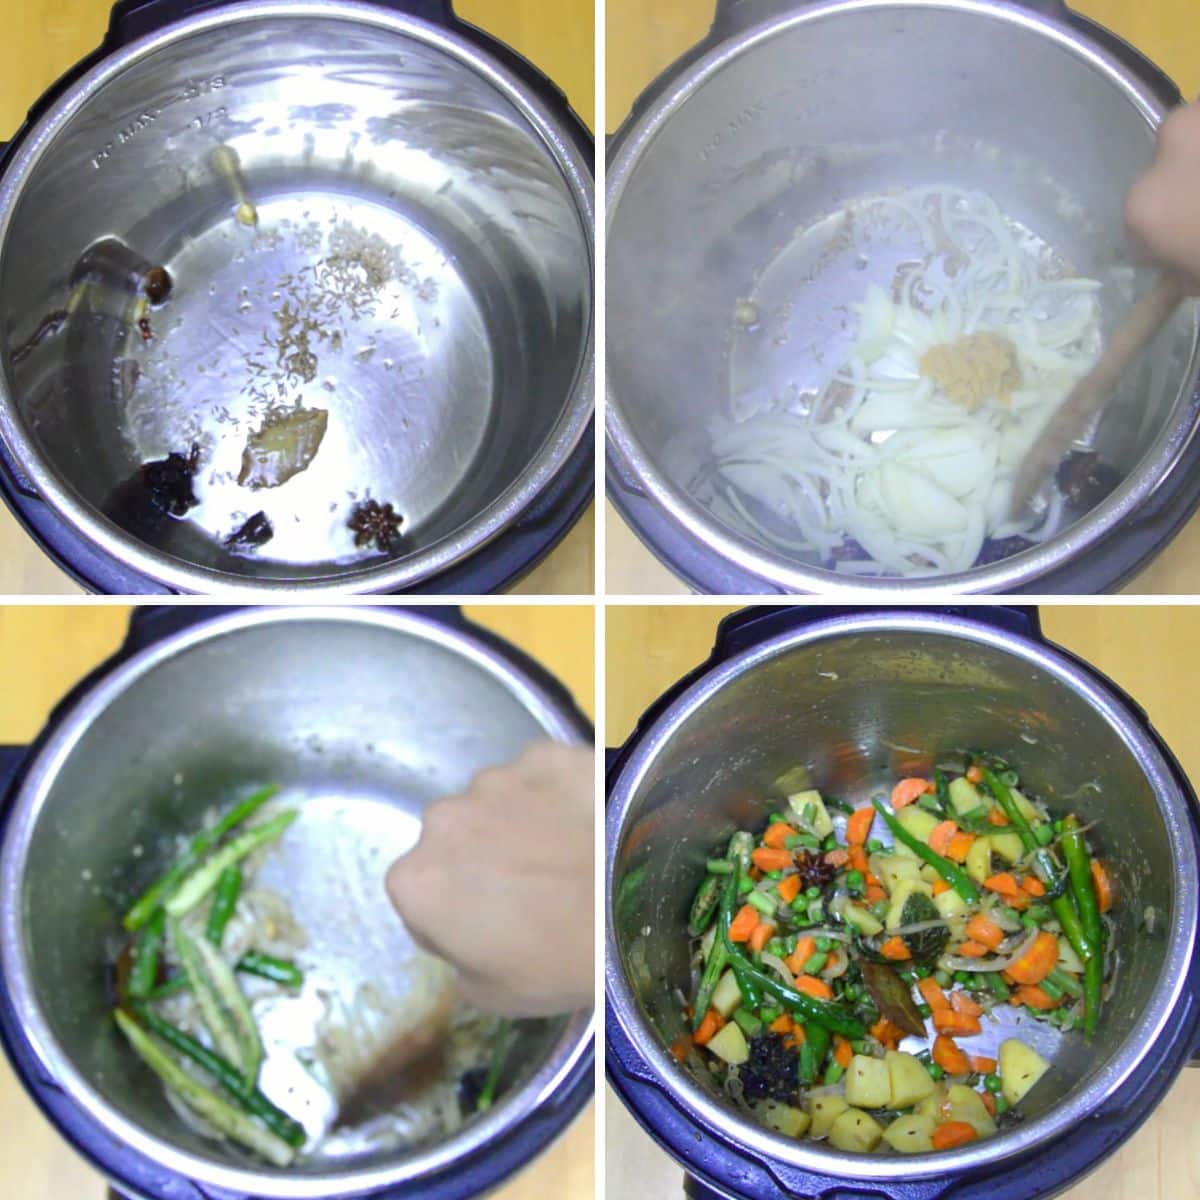 college of 4 images of instant pot showing the process of frying whole spices and sauteing vegetables in the inner steel container of instant pot. 